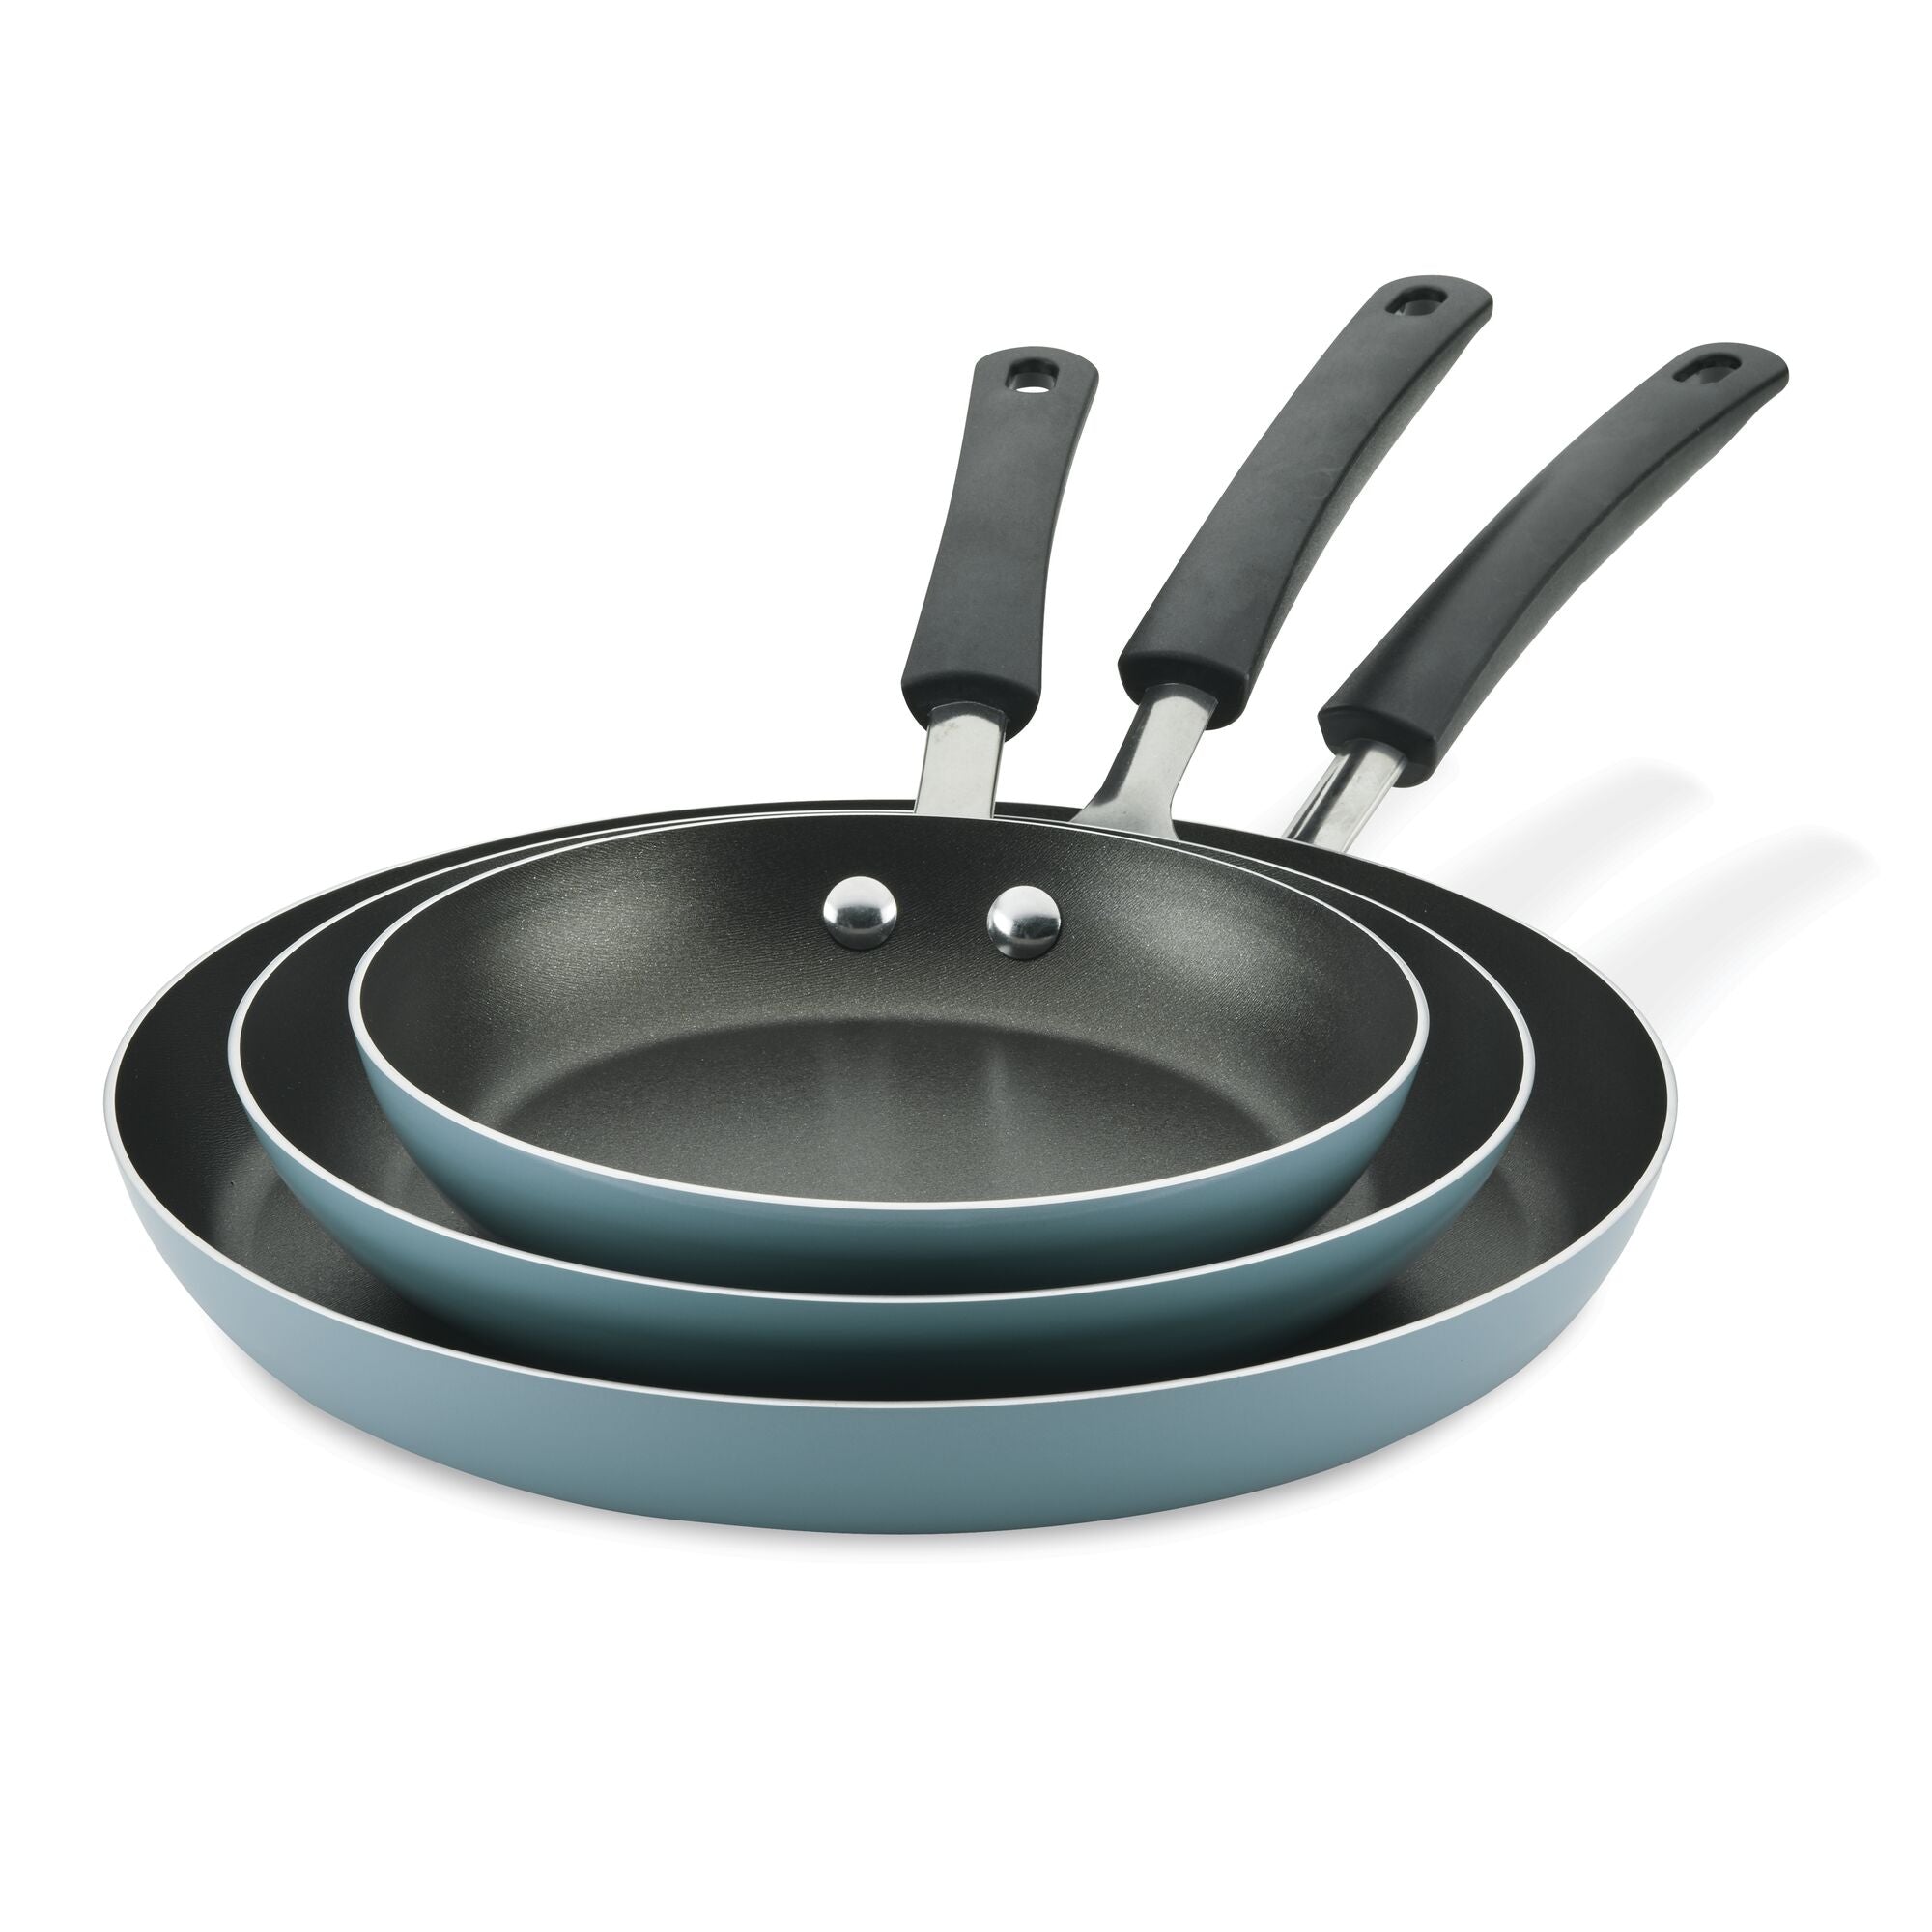 3-Piece Nonstick Skillets Pans Set, Contains 8 Inch Frying Pan and